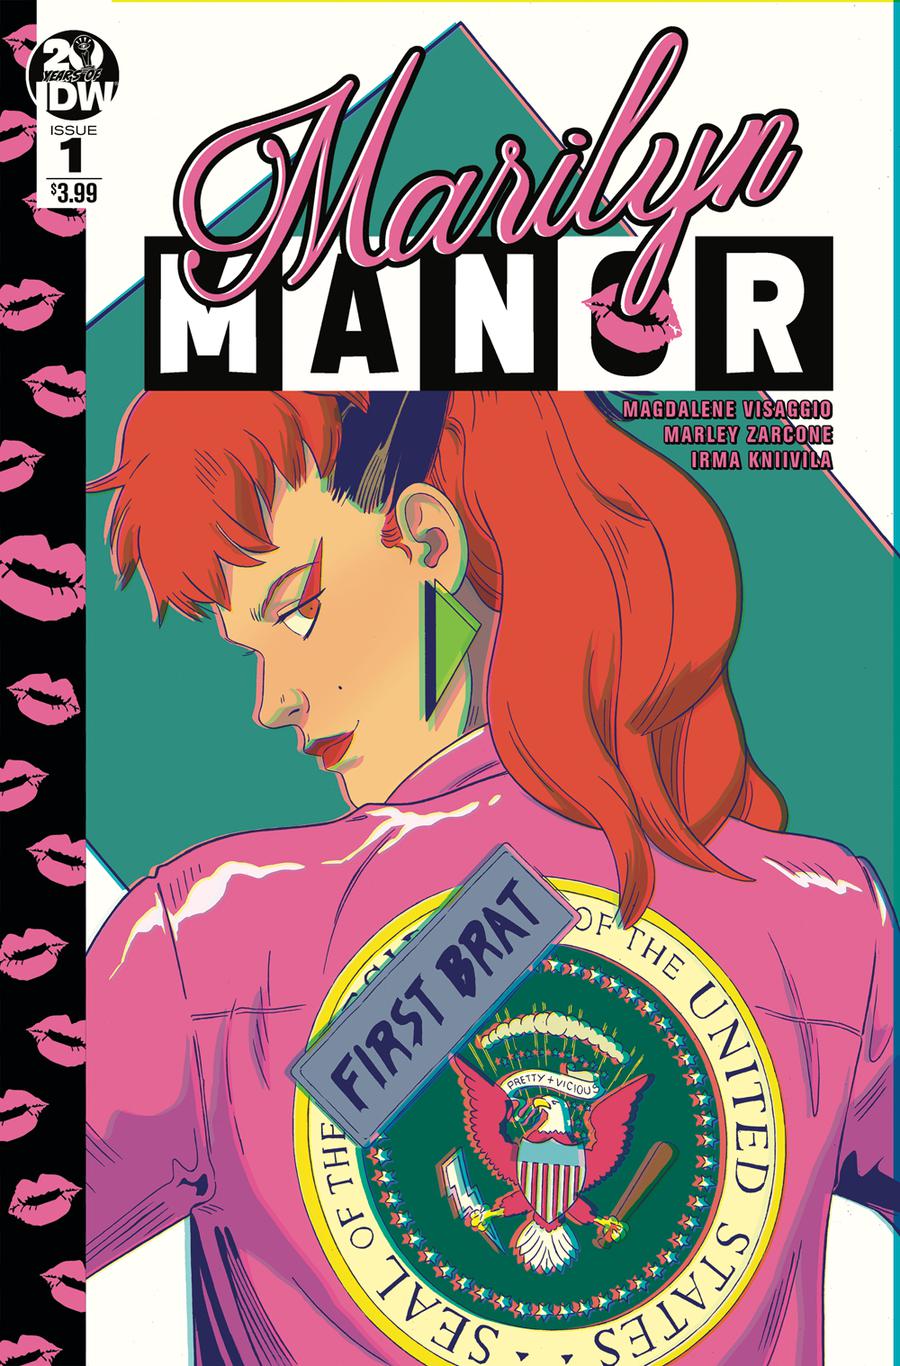 Marilyn Manor #1 Cover A Regular Marley Zarcone Cover